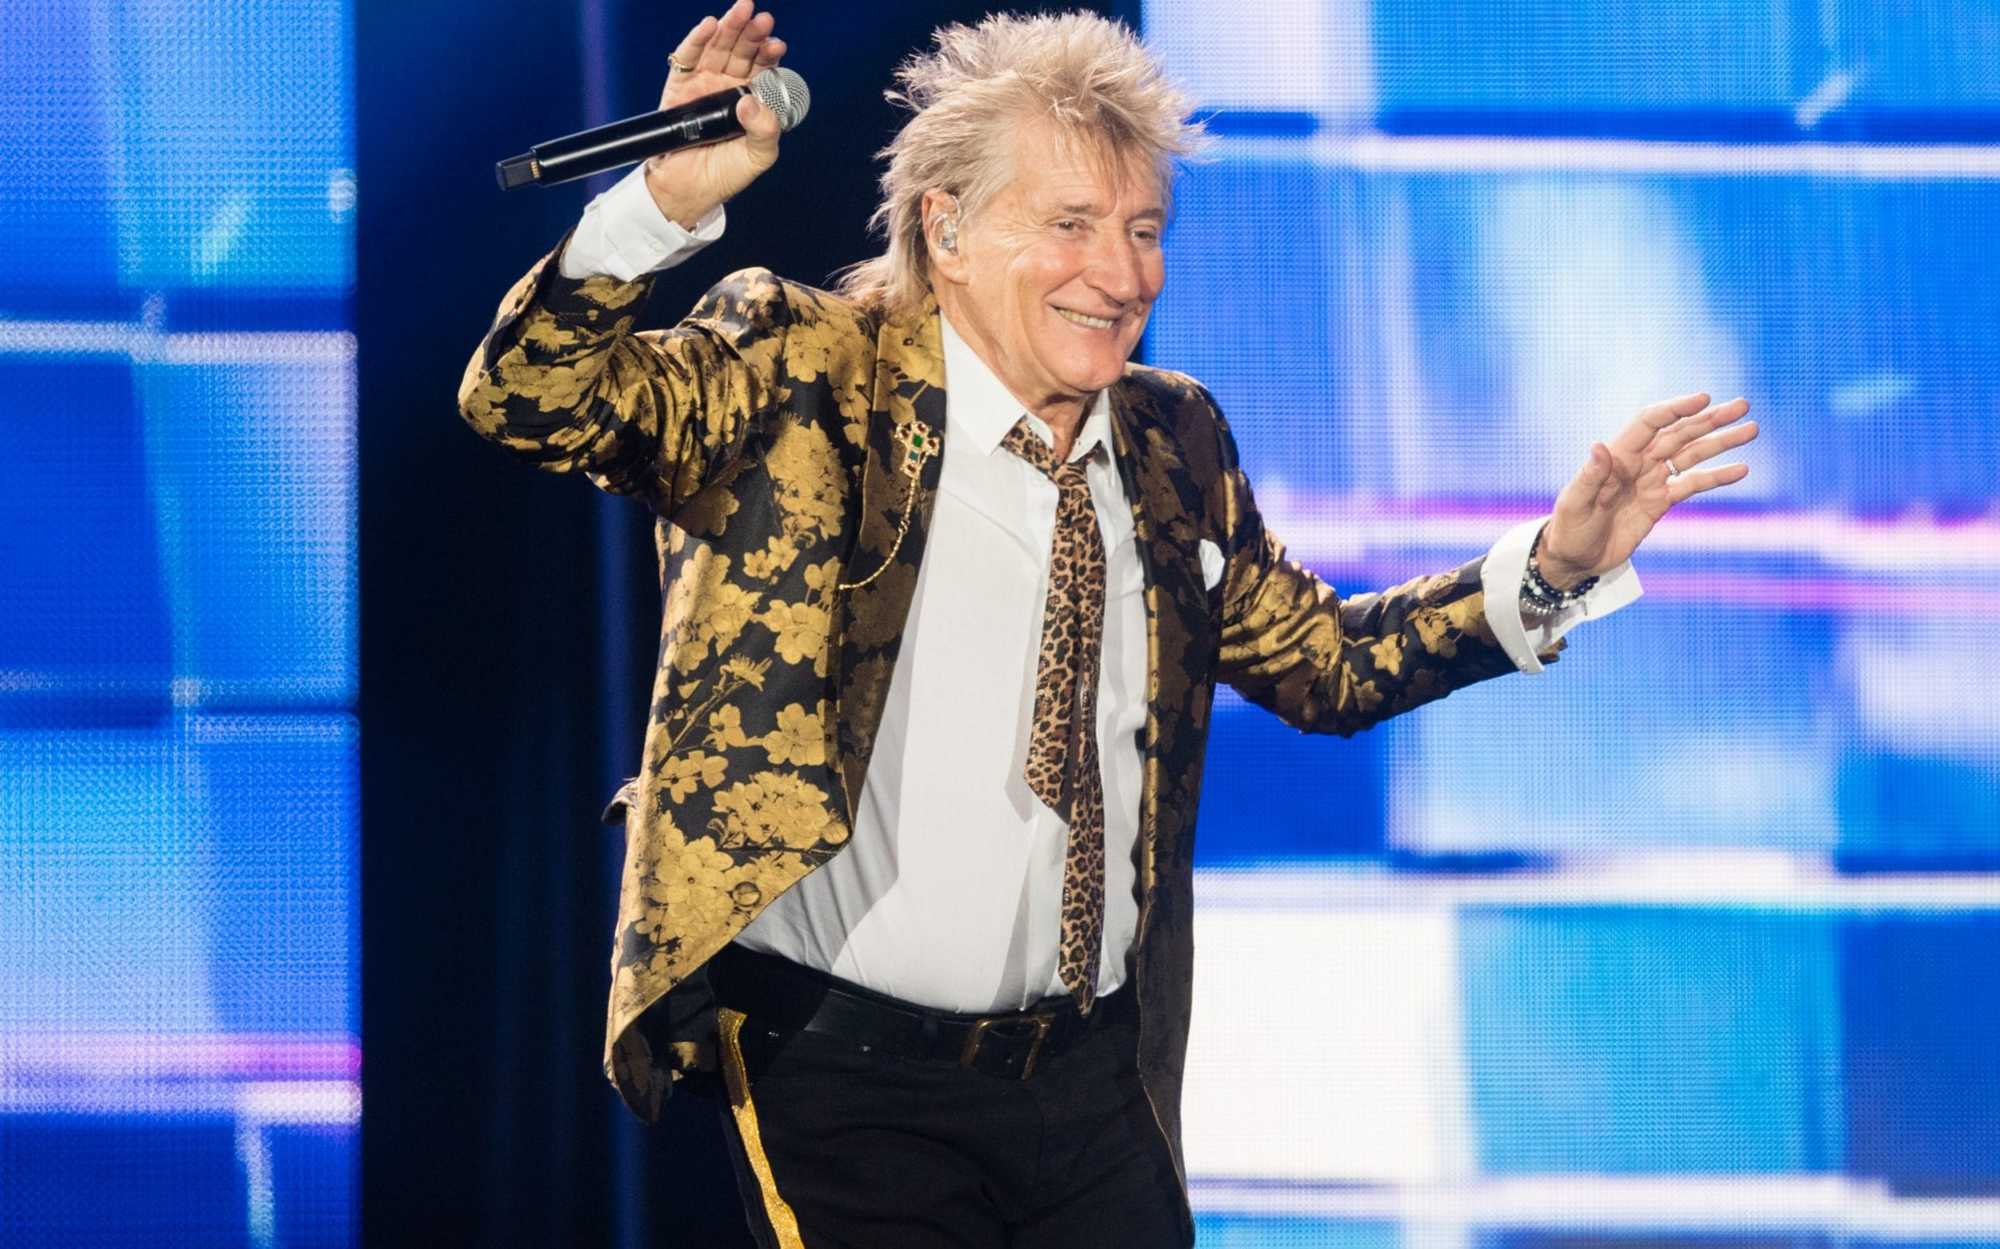 Is there a reason to believe Rod Stewart will be living in Lakewood Ranch?